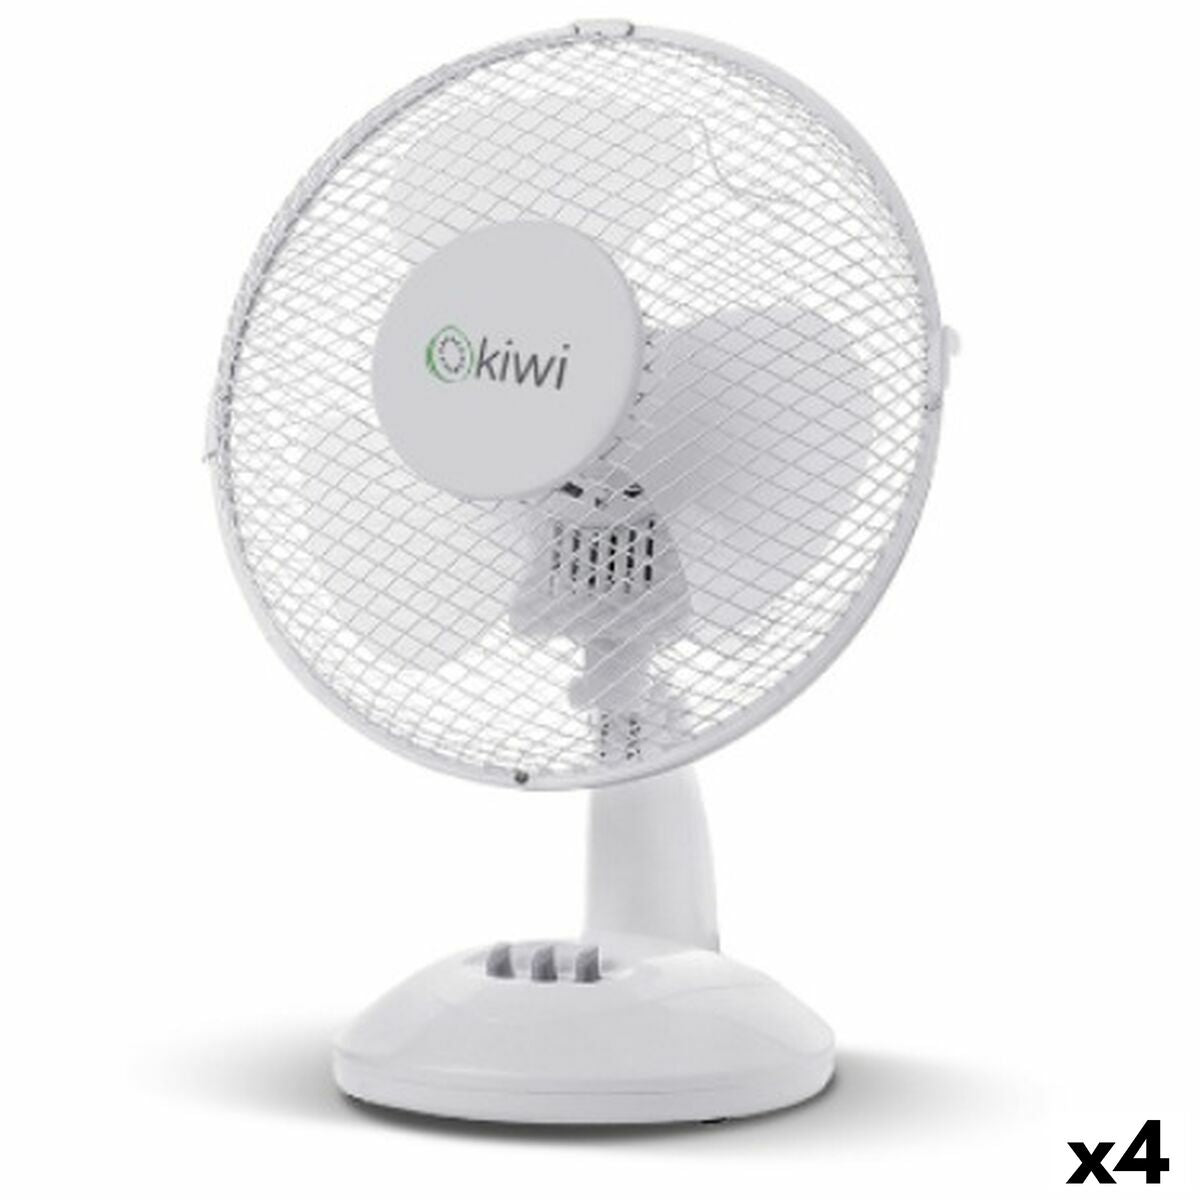 Table Fan Kiwi White Ø 27 cm 21W (4 Units), Kiwi, Home and cooking, Portable air conditioning, table-fan-kiwi-white-o-27-cm-21w-4-units, Brand_Kiwi, category-reference-2399, category-reference-2450, category-reference-2451, category-reference-t-19656, category-reference-t-21087, category-reference-t-25217, category-reference-t-29129, Condition_NEW, ferretería, Price_50 - 100, summer, RiotNook